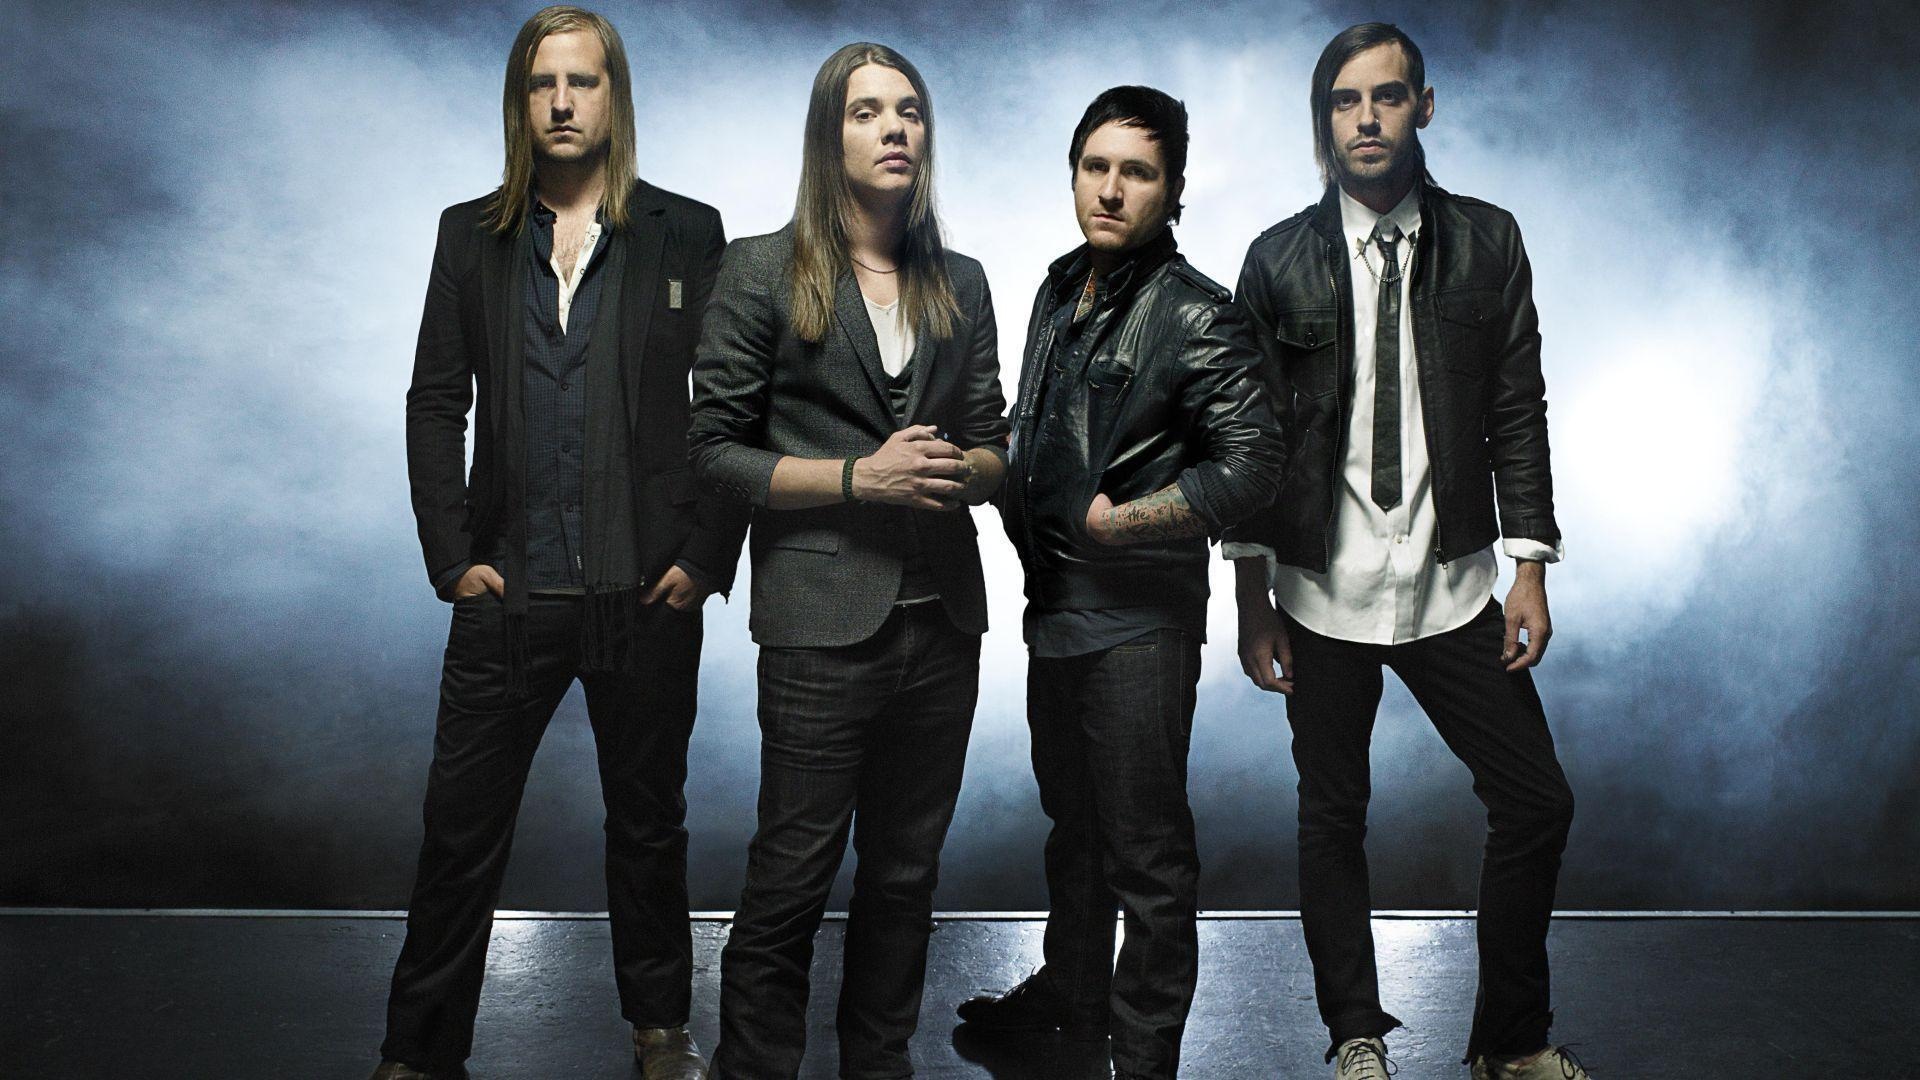 The Red Jumpsuit Apparatus, Captivating wallpapers, Band's essence, 1920x1080 Full HD Desktop